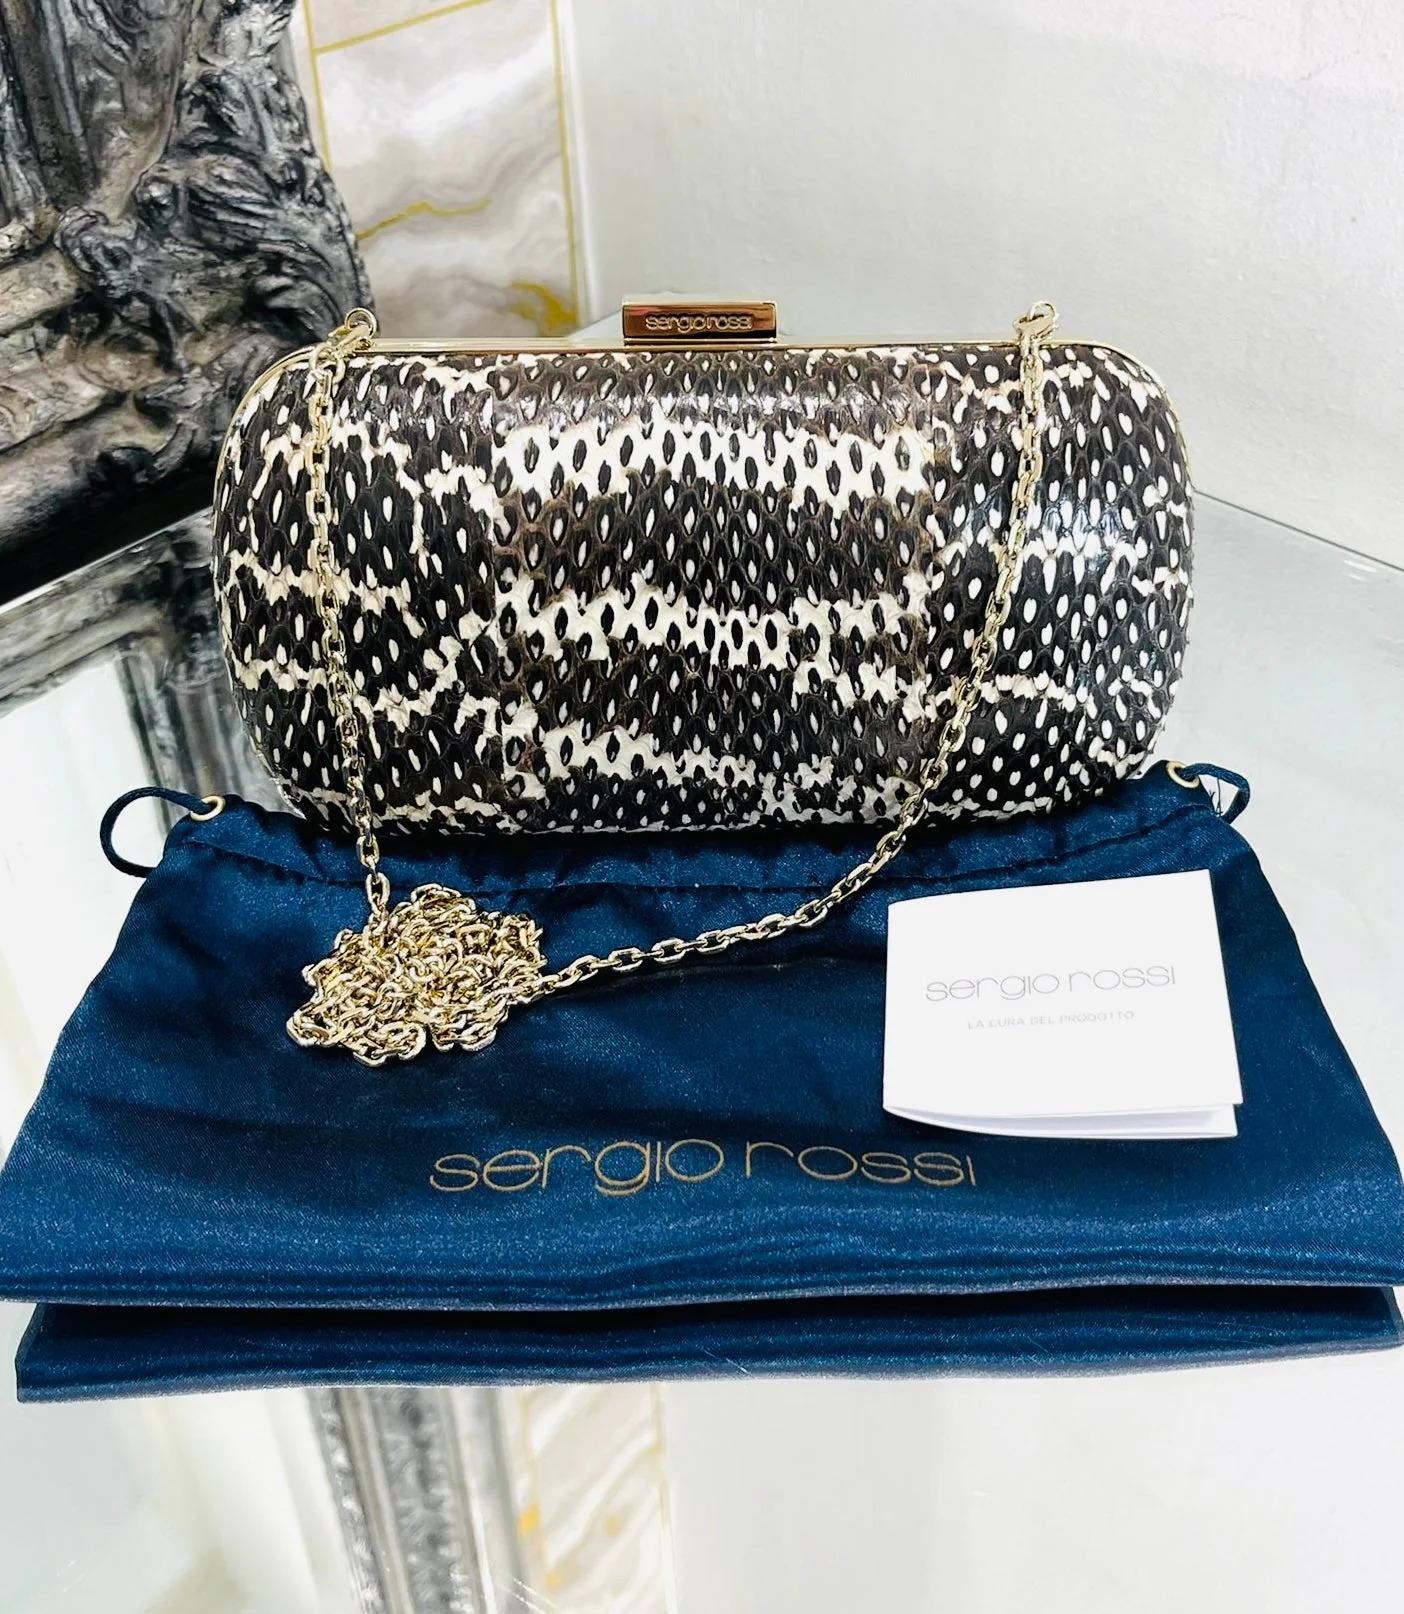 Sergio Rossi Lizard Skin Clutch Bag With Chain For Sale 1